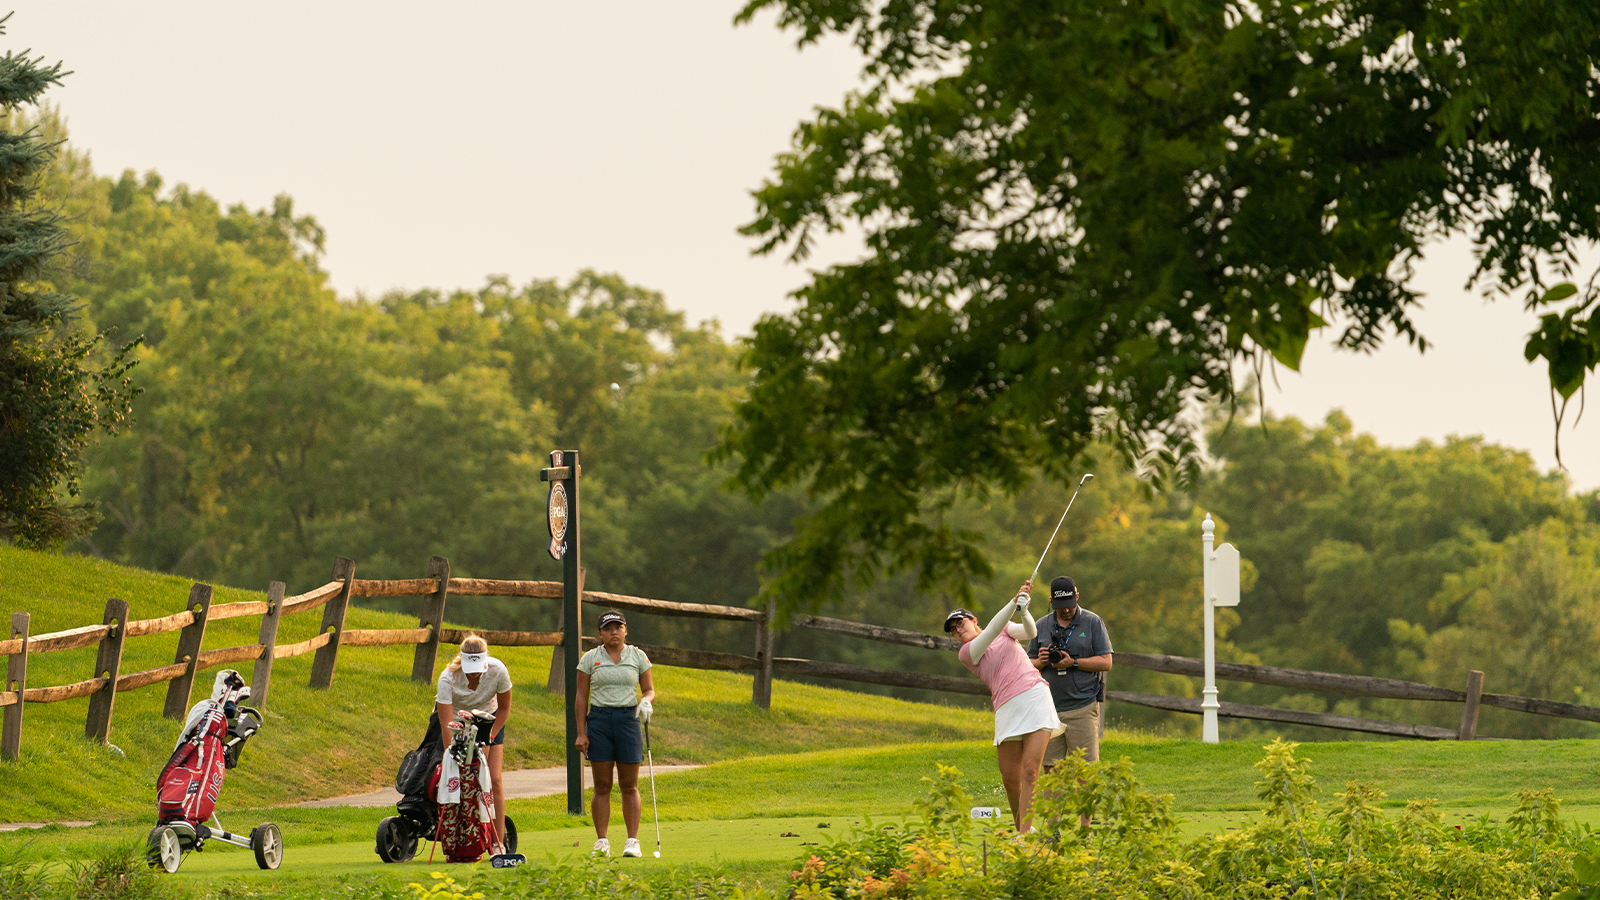 Julia Misemer hits her shot from the 14th tee during the third round for the 46th Boys and Girls Junior PGA Championship held at Cog Hill Golf & Country Club on August 4, 2022 in Lemont, Illinois. (Photo by Hailey Garrett/PGA of America)